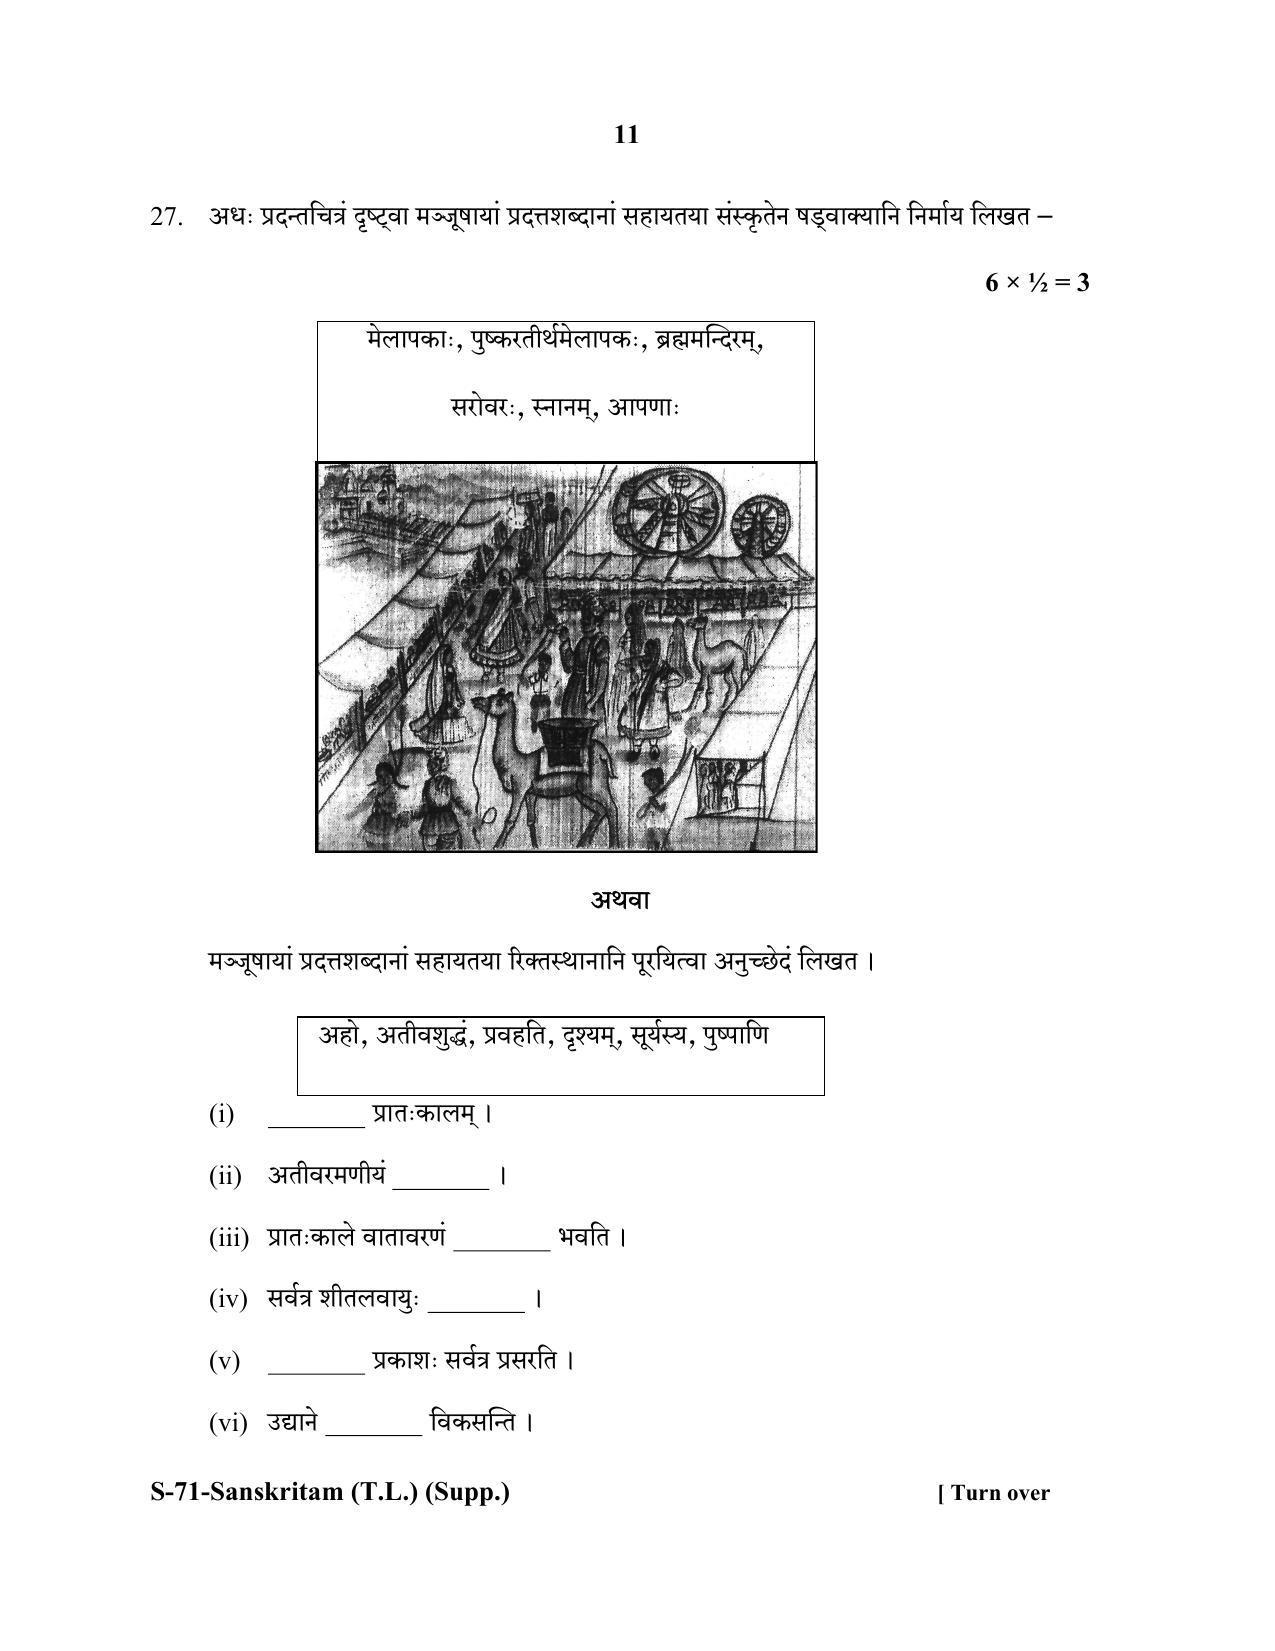 RBSE Class 10 Sanskrit TL Supplementary 2020 Question Paper - Page 11